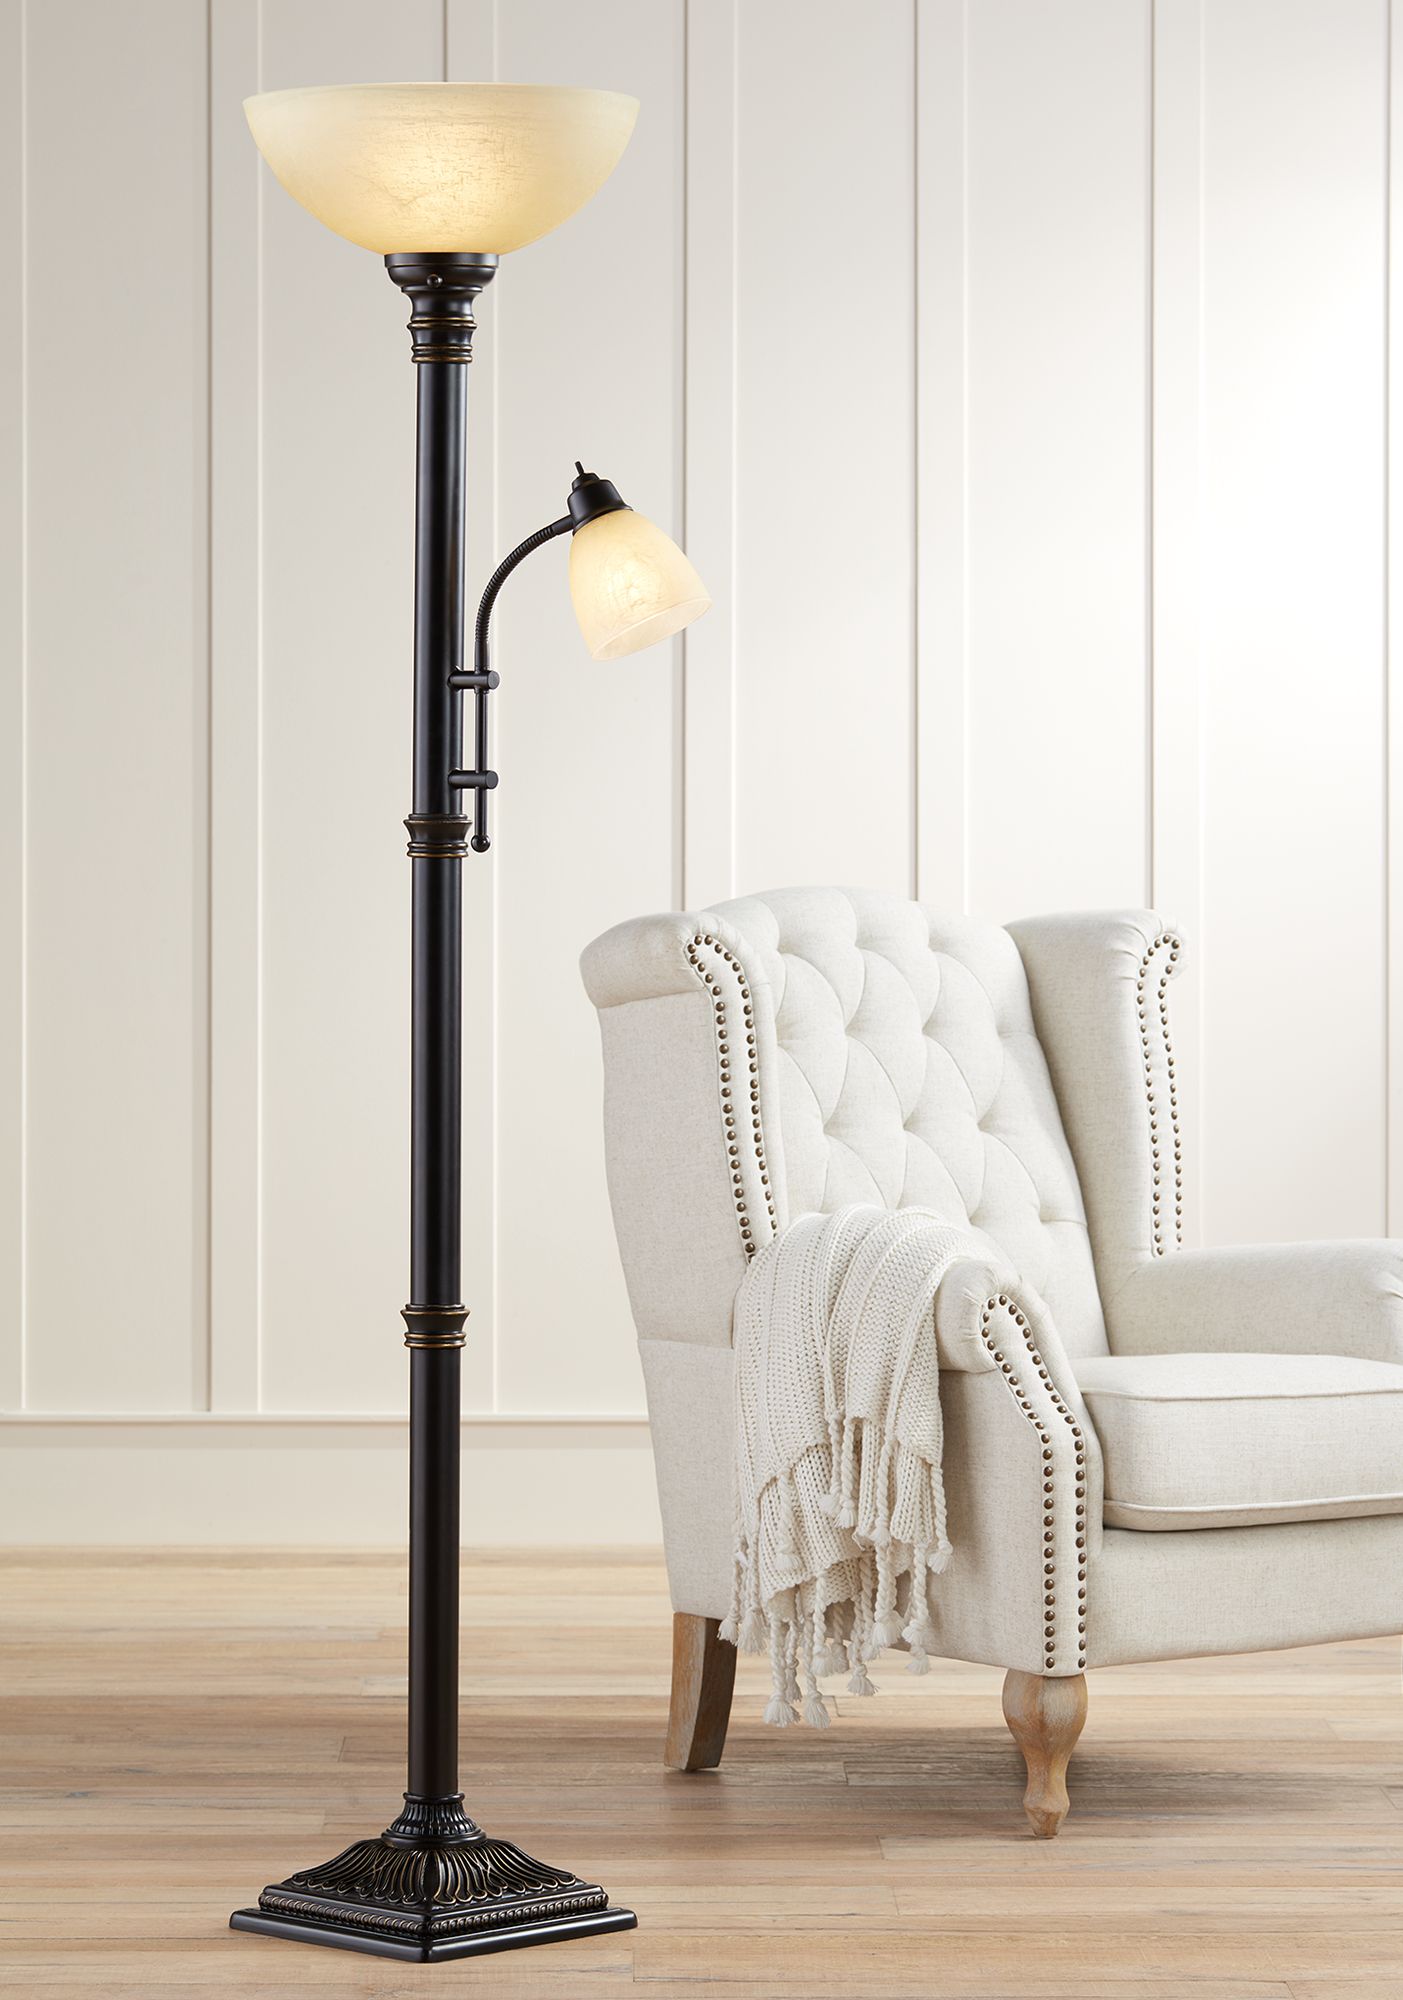 Reading and Task Floor Lamps | Lamps Plus